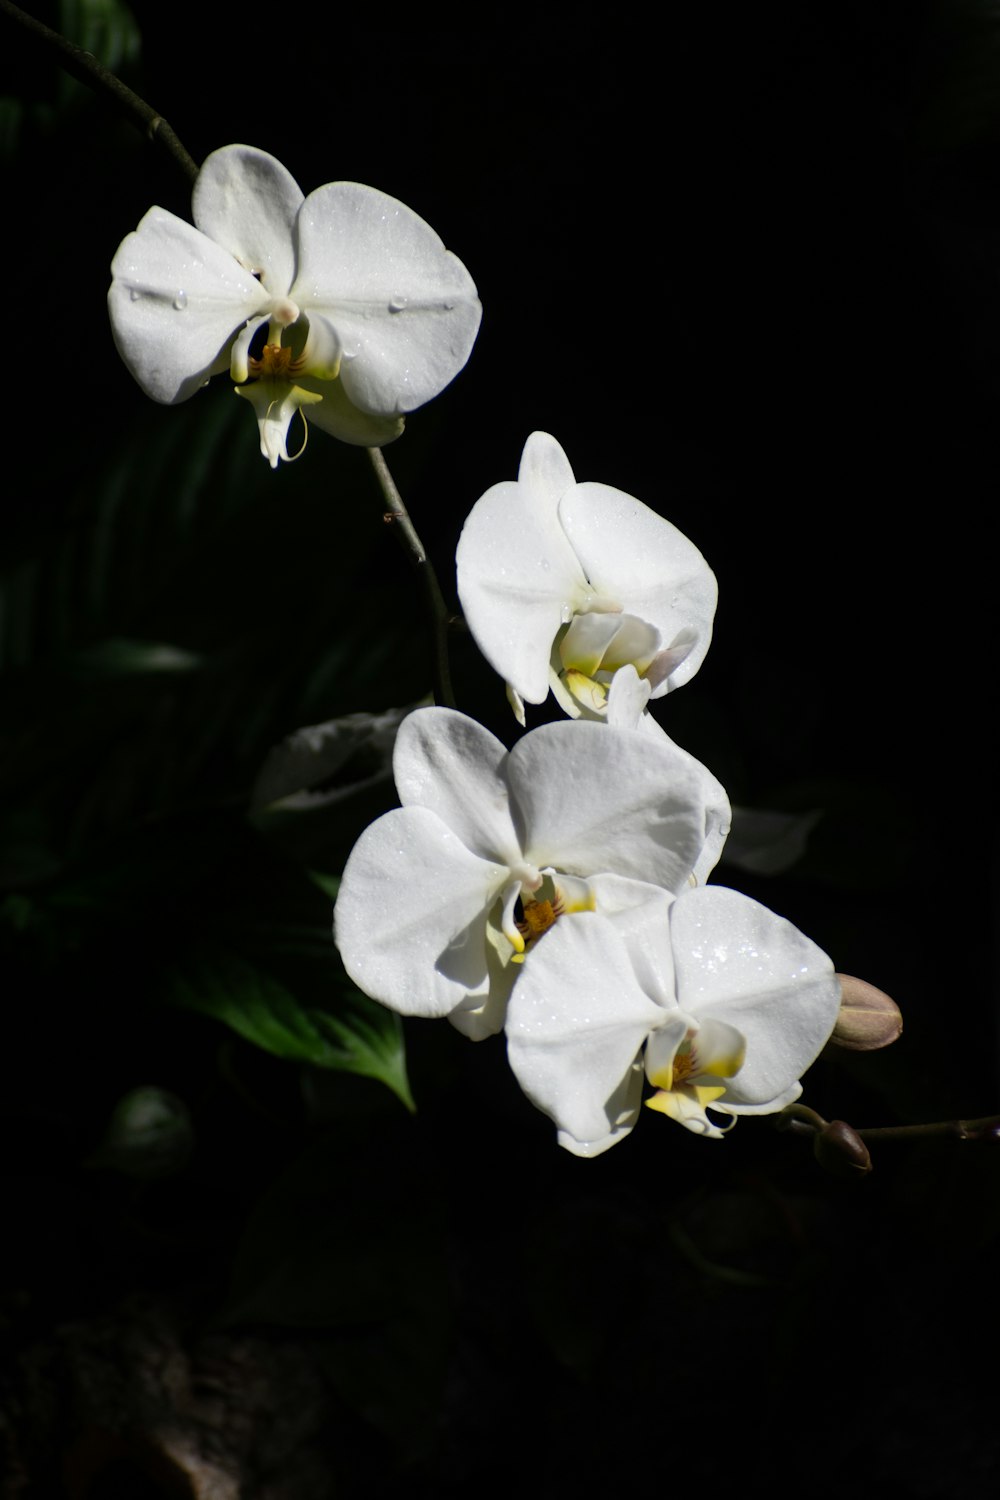 three white orchids are blooming in the dark